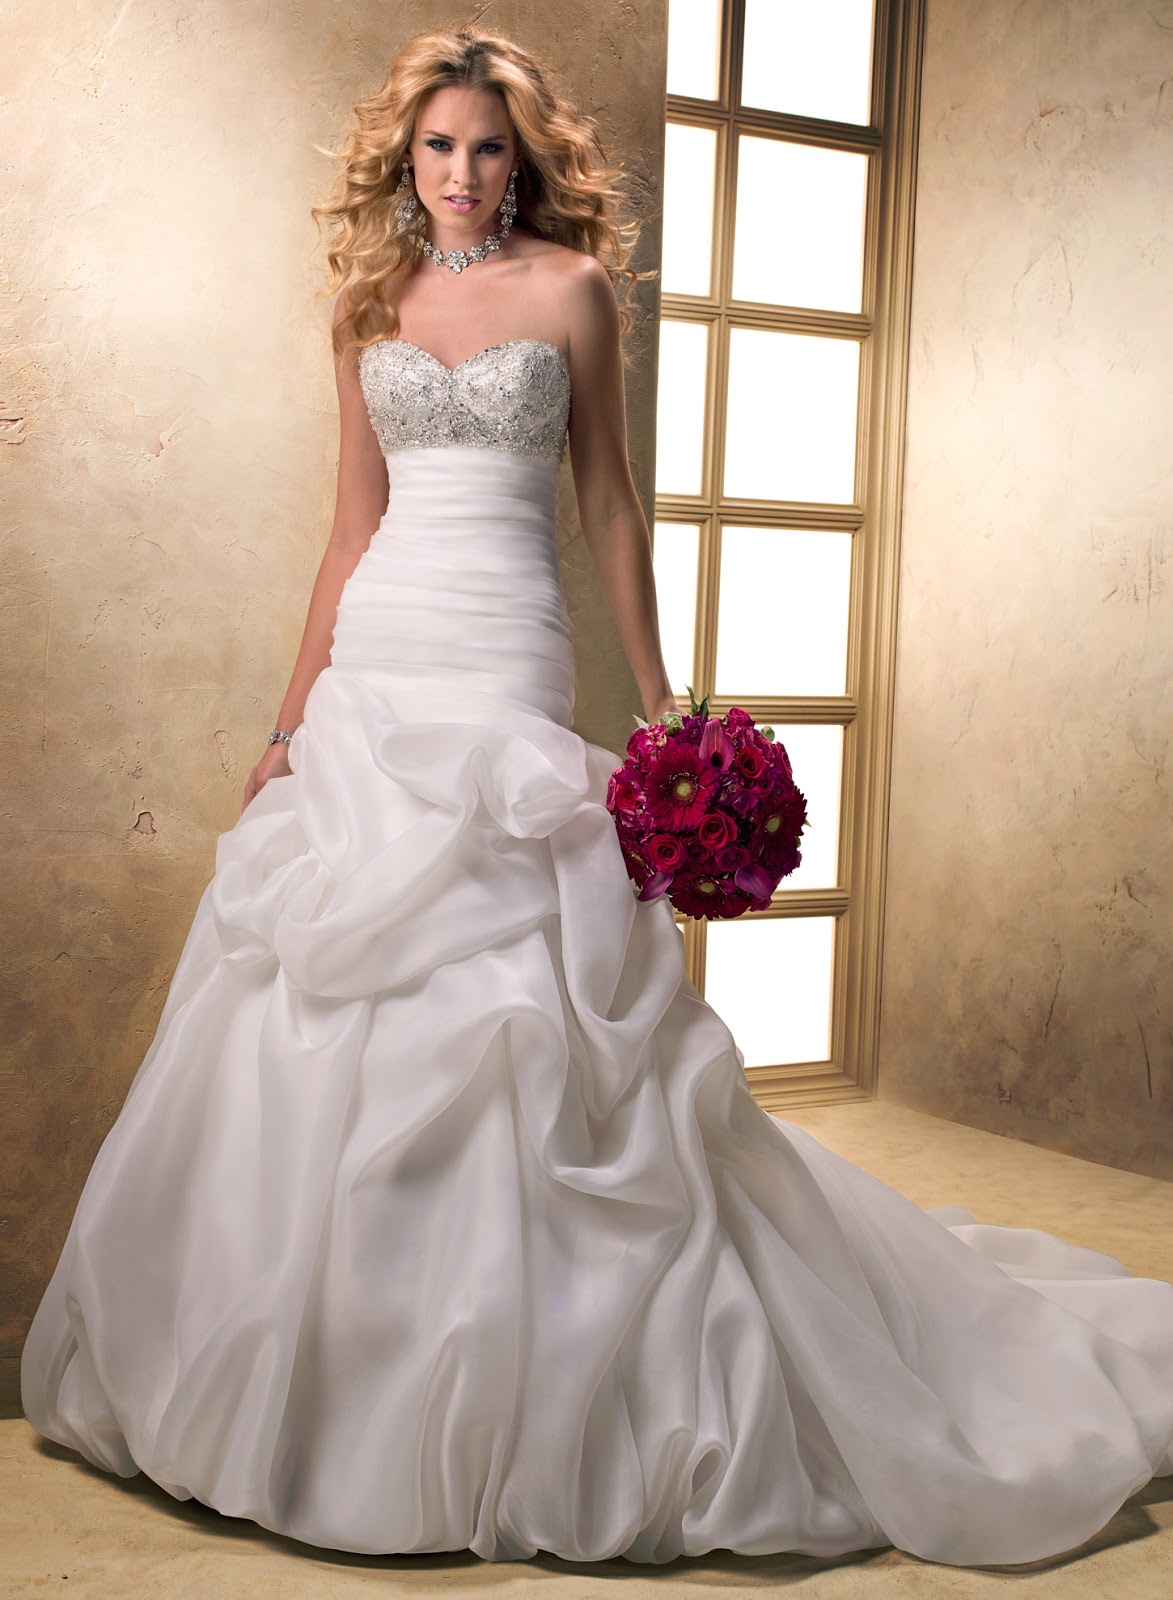 IN LOVE WITH BEAUTY: Maggie Sottero Wedding Dresses - part 1